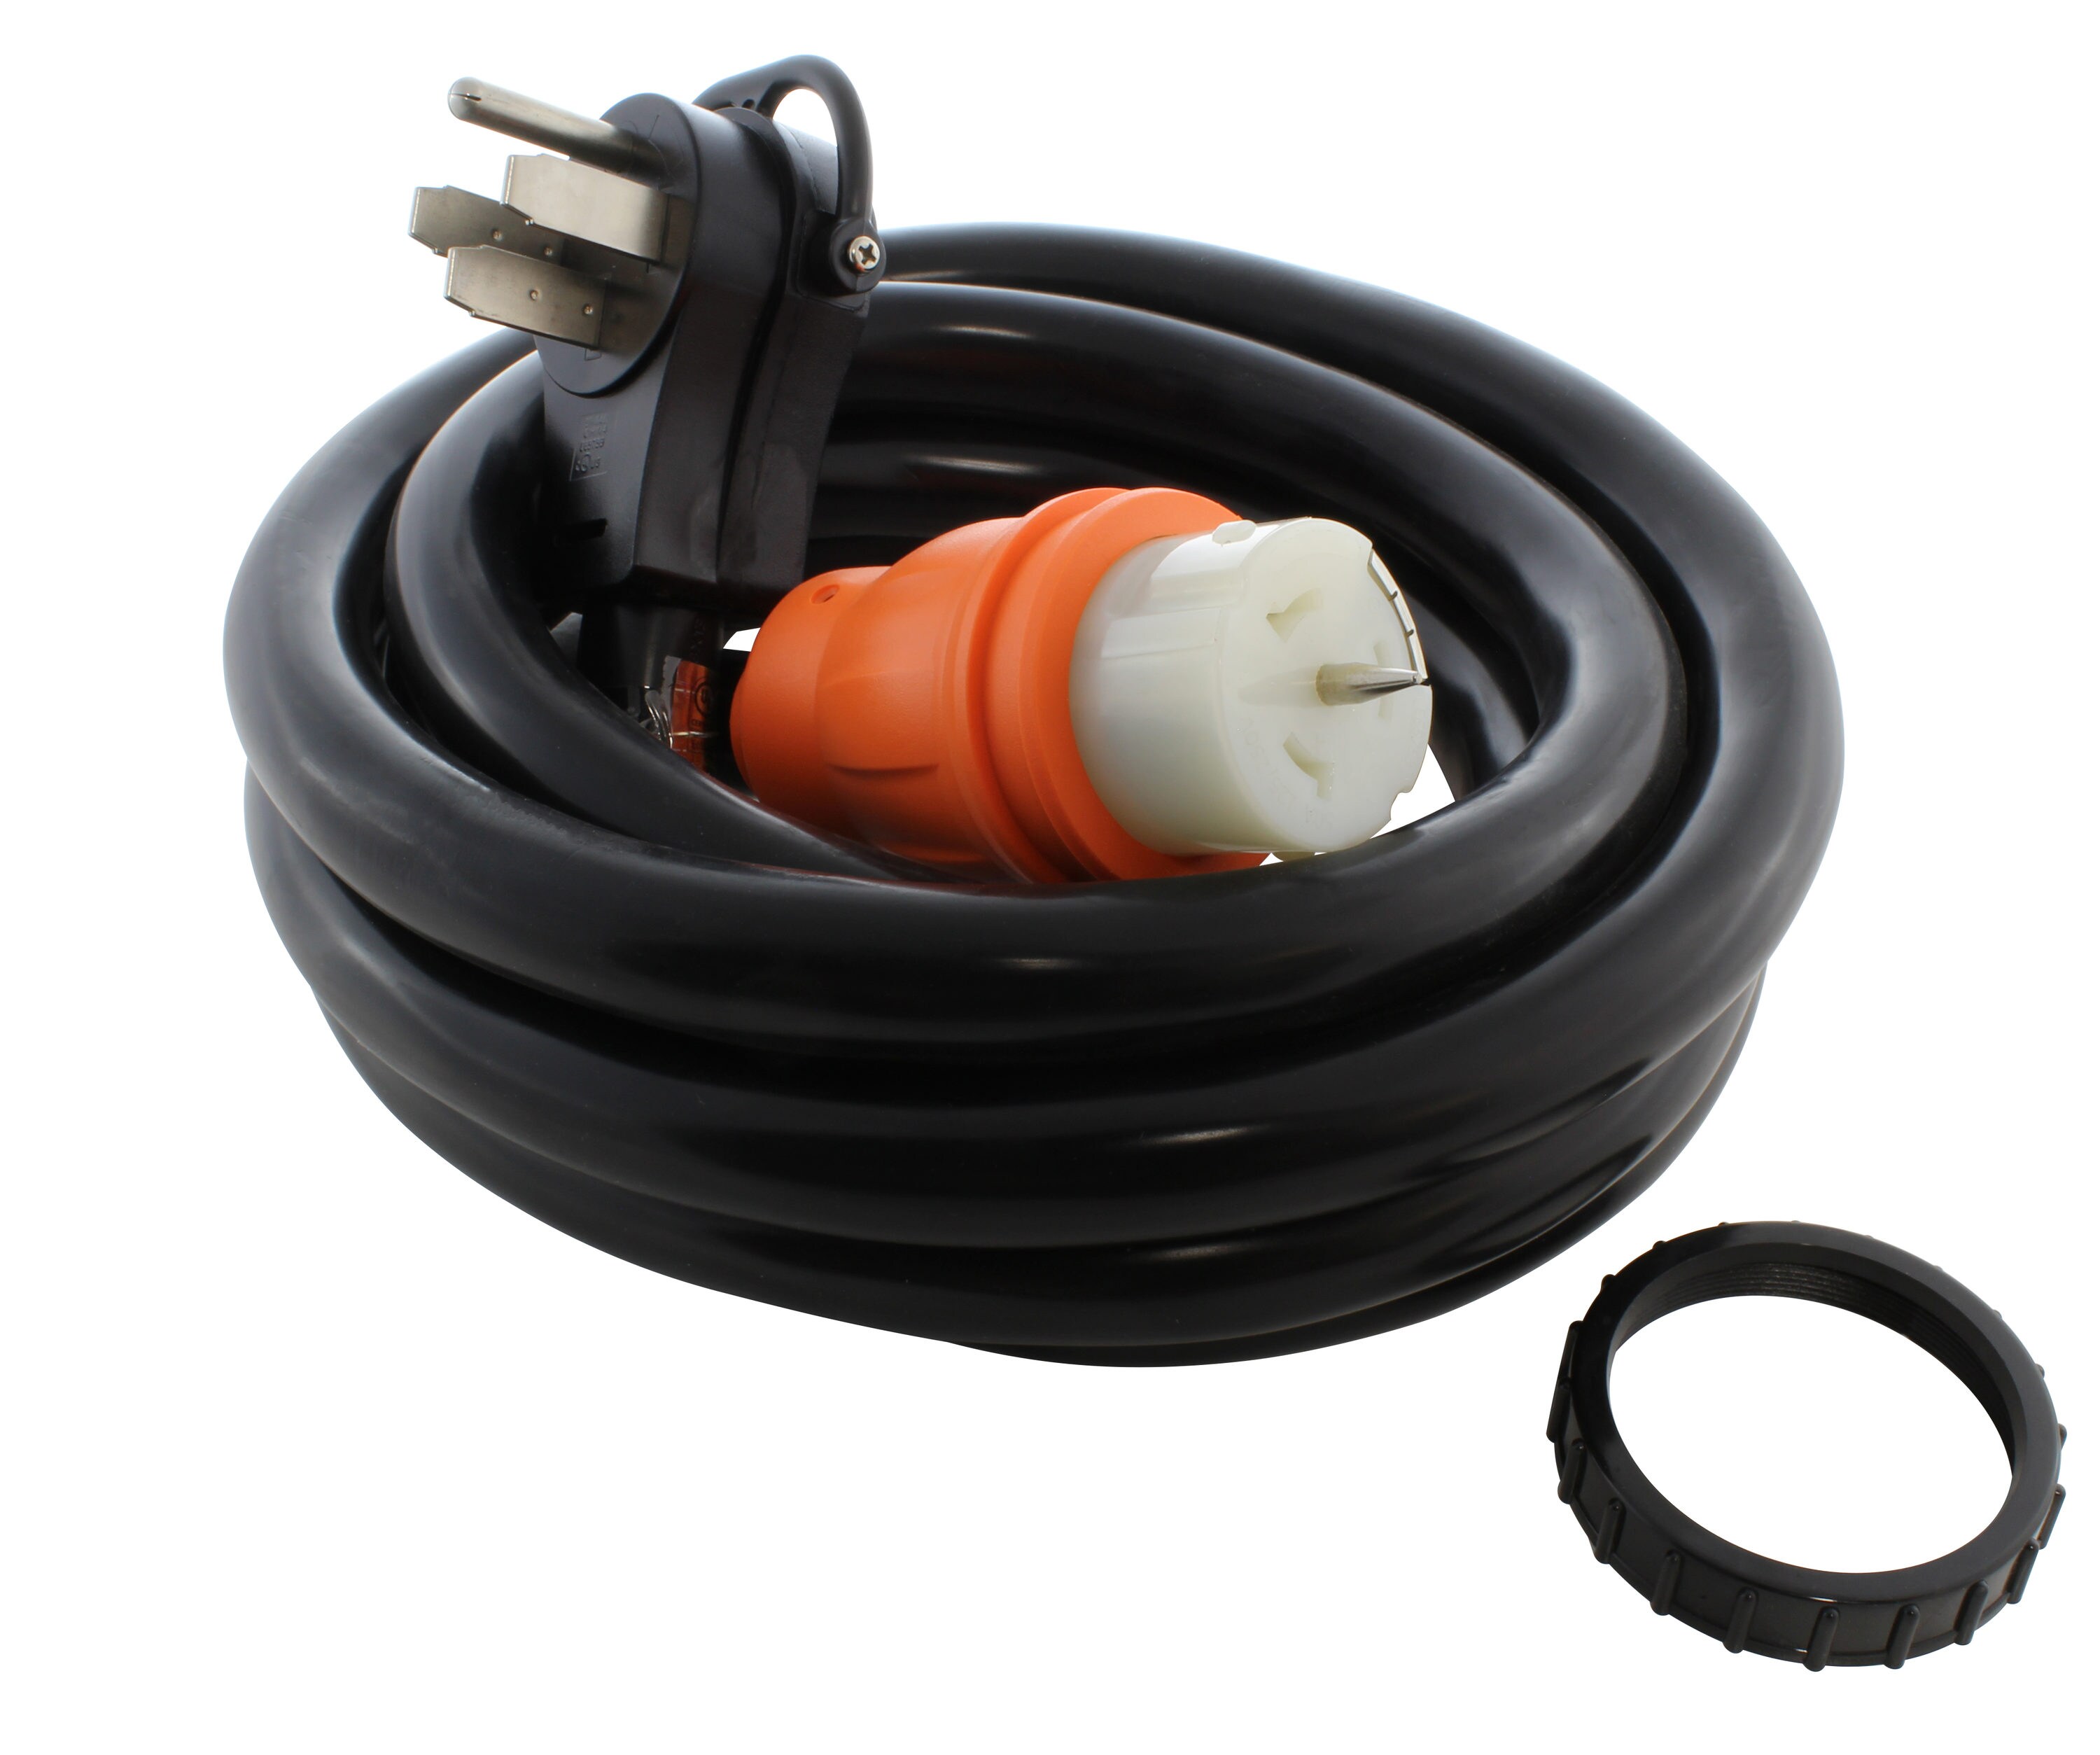 Details about   10FT Generator Extension Cord 50Amp 125/250V 14-50P to CS6364 Locking Connector 